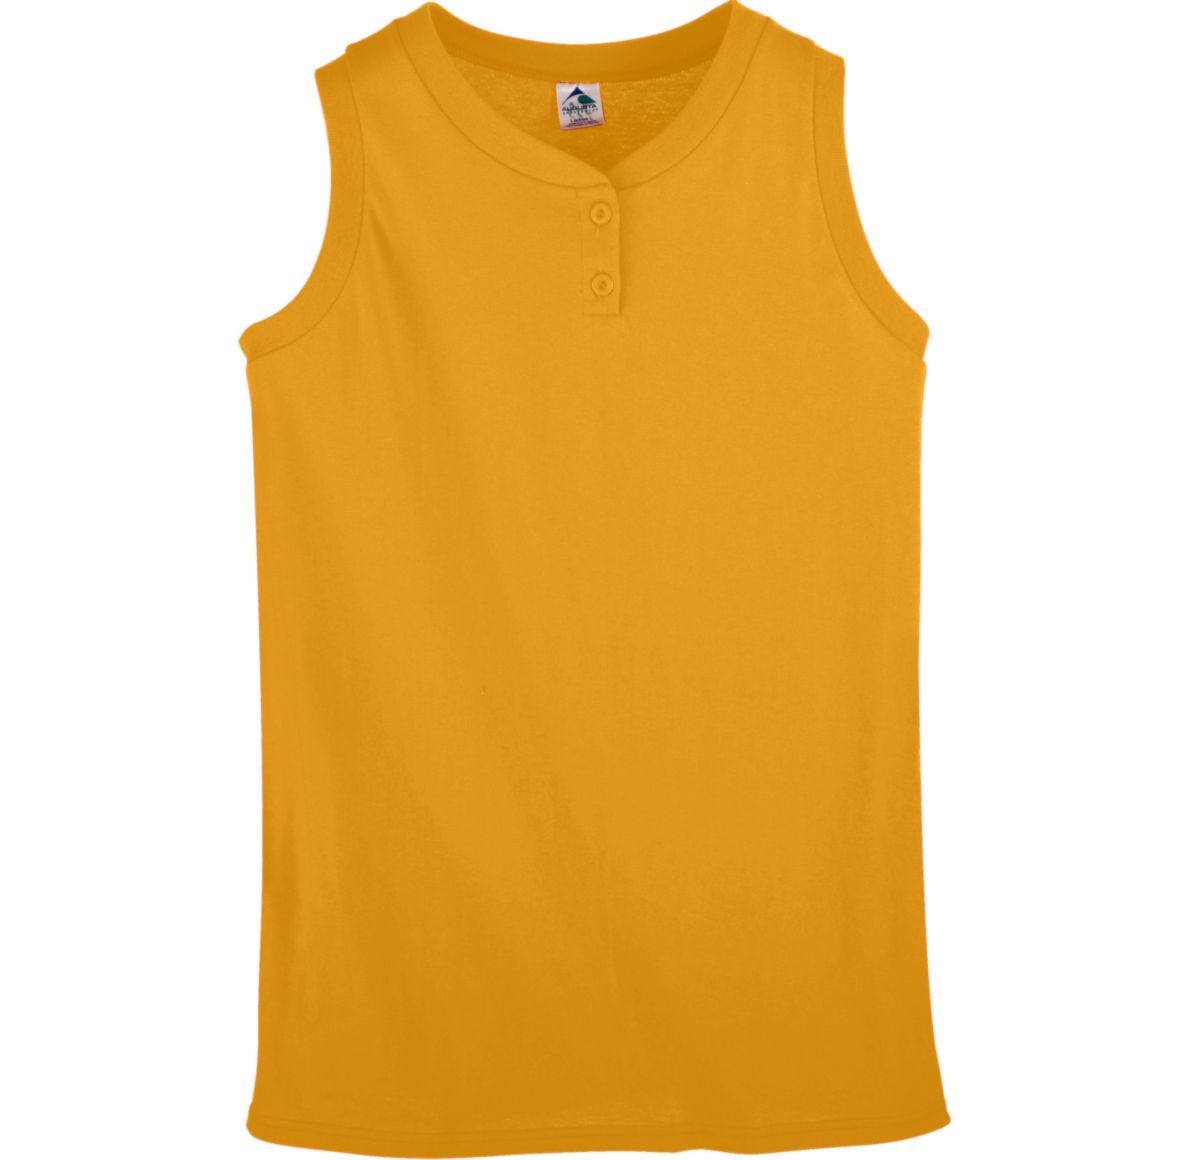 Augusta Sportswear Ladies Sleeveless Two Button Softball Jersey in Gold  -Part of the Ladies, Ladies-Jersey, Augusta-Products, Softball, Shirts product lines at KanaleyCreations.com